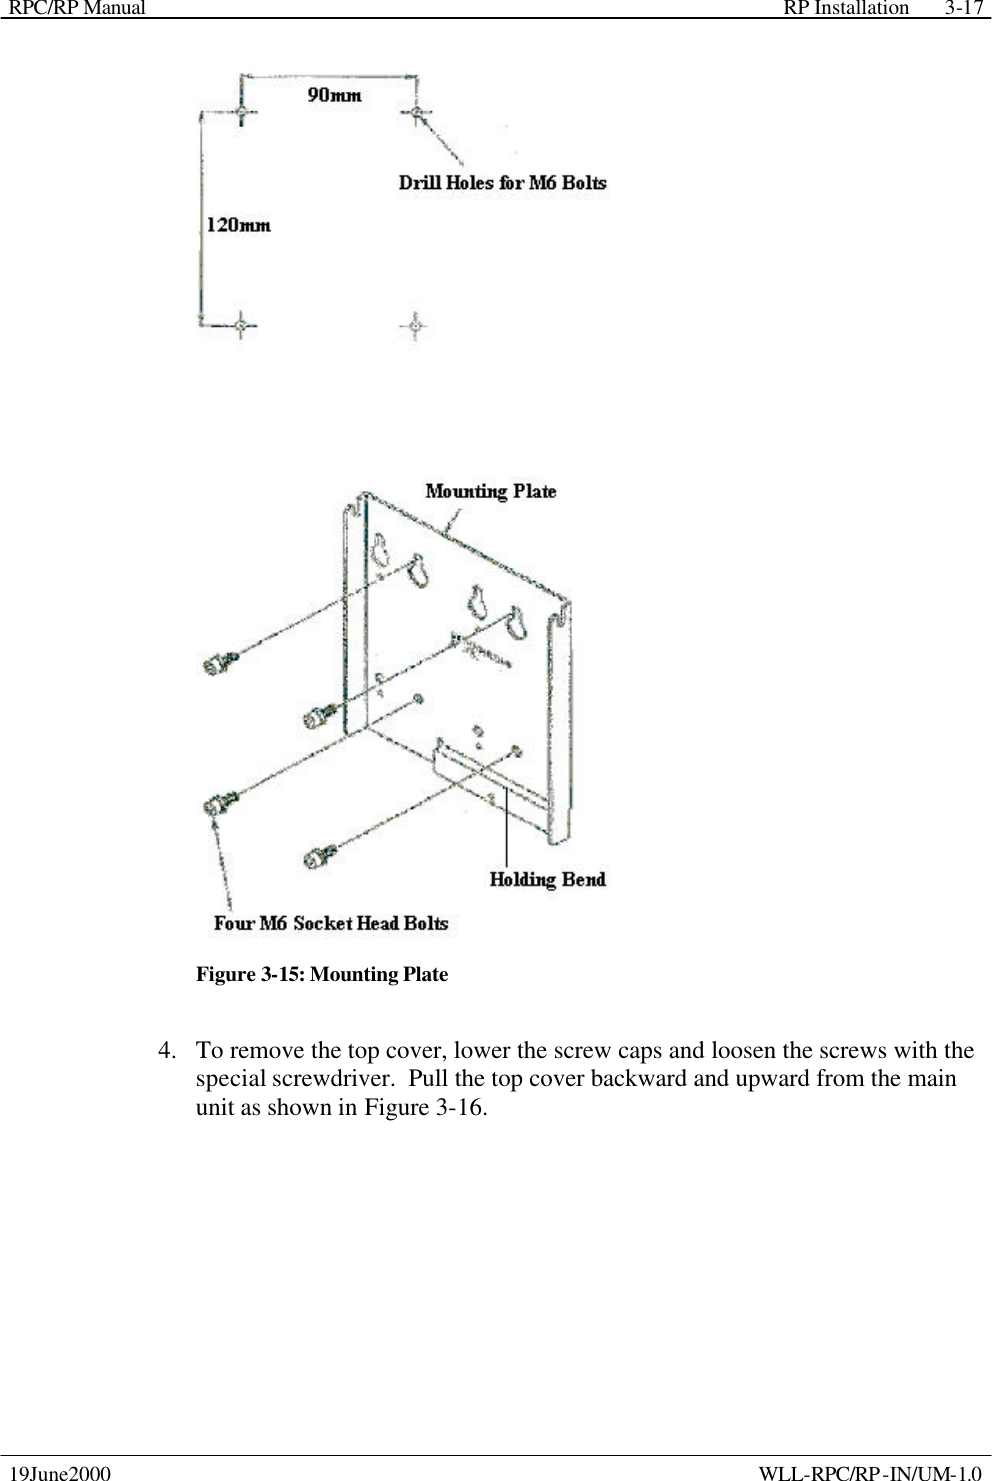 RPC/RP Manual    RP Installation  19June2000    WLL-RPC/RP-IN/UM-1.0 3-17 Figure 3-15: Mounting Plate 4.  To remove the top cover, lower the screw caps and loosen the screws with the special screwdriver.  Pull the top cover backward and upward from the main unit as shown in Figure 3-16. 